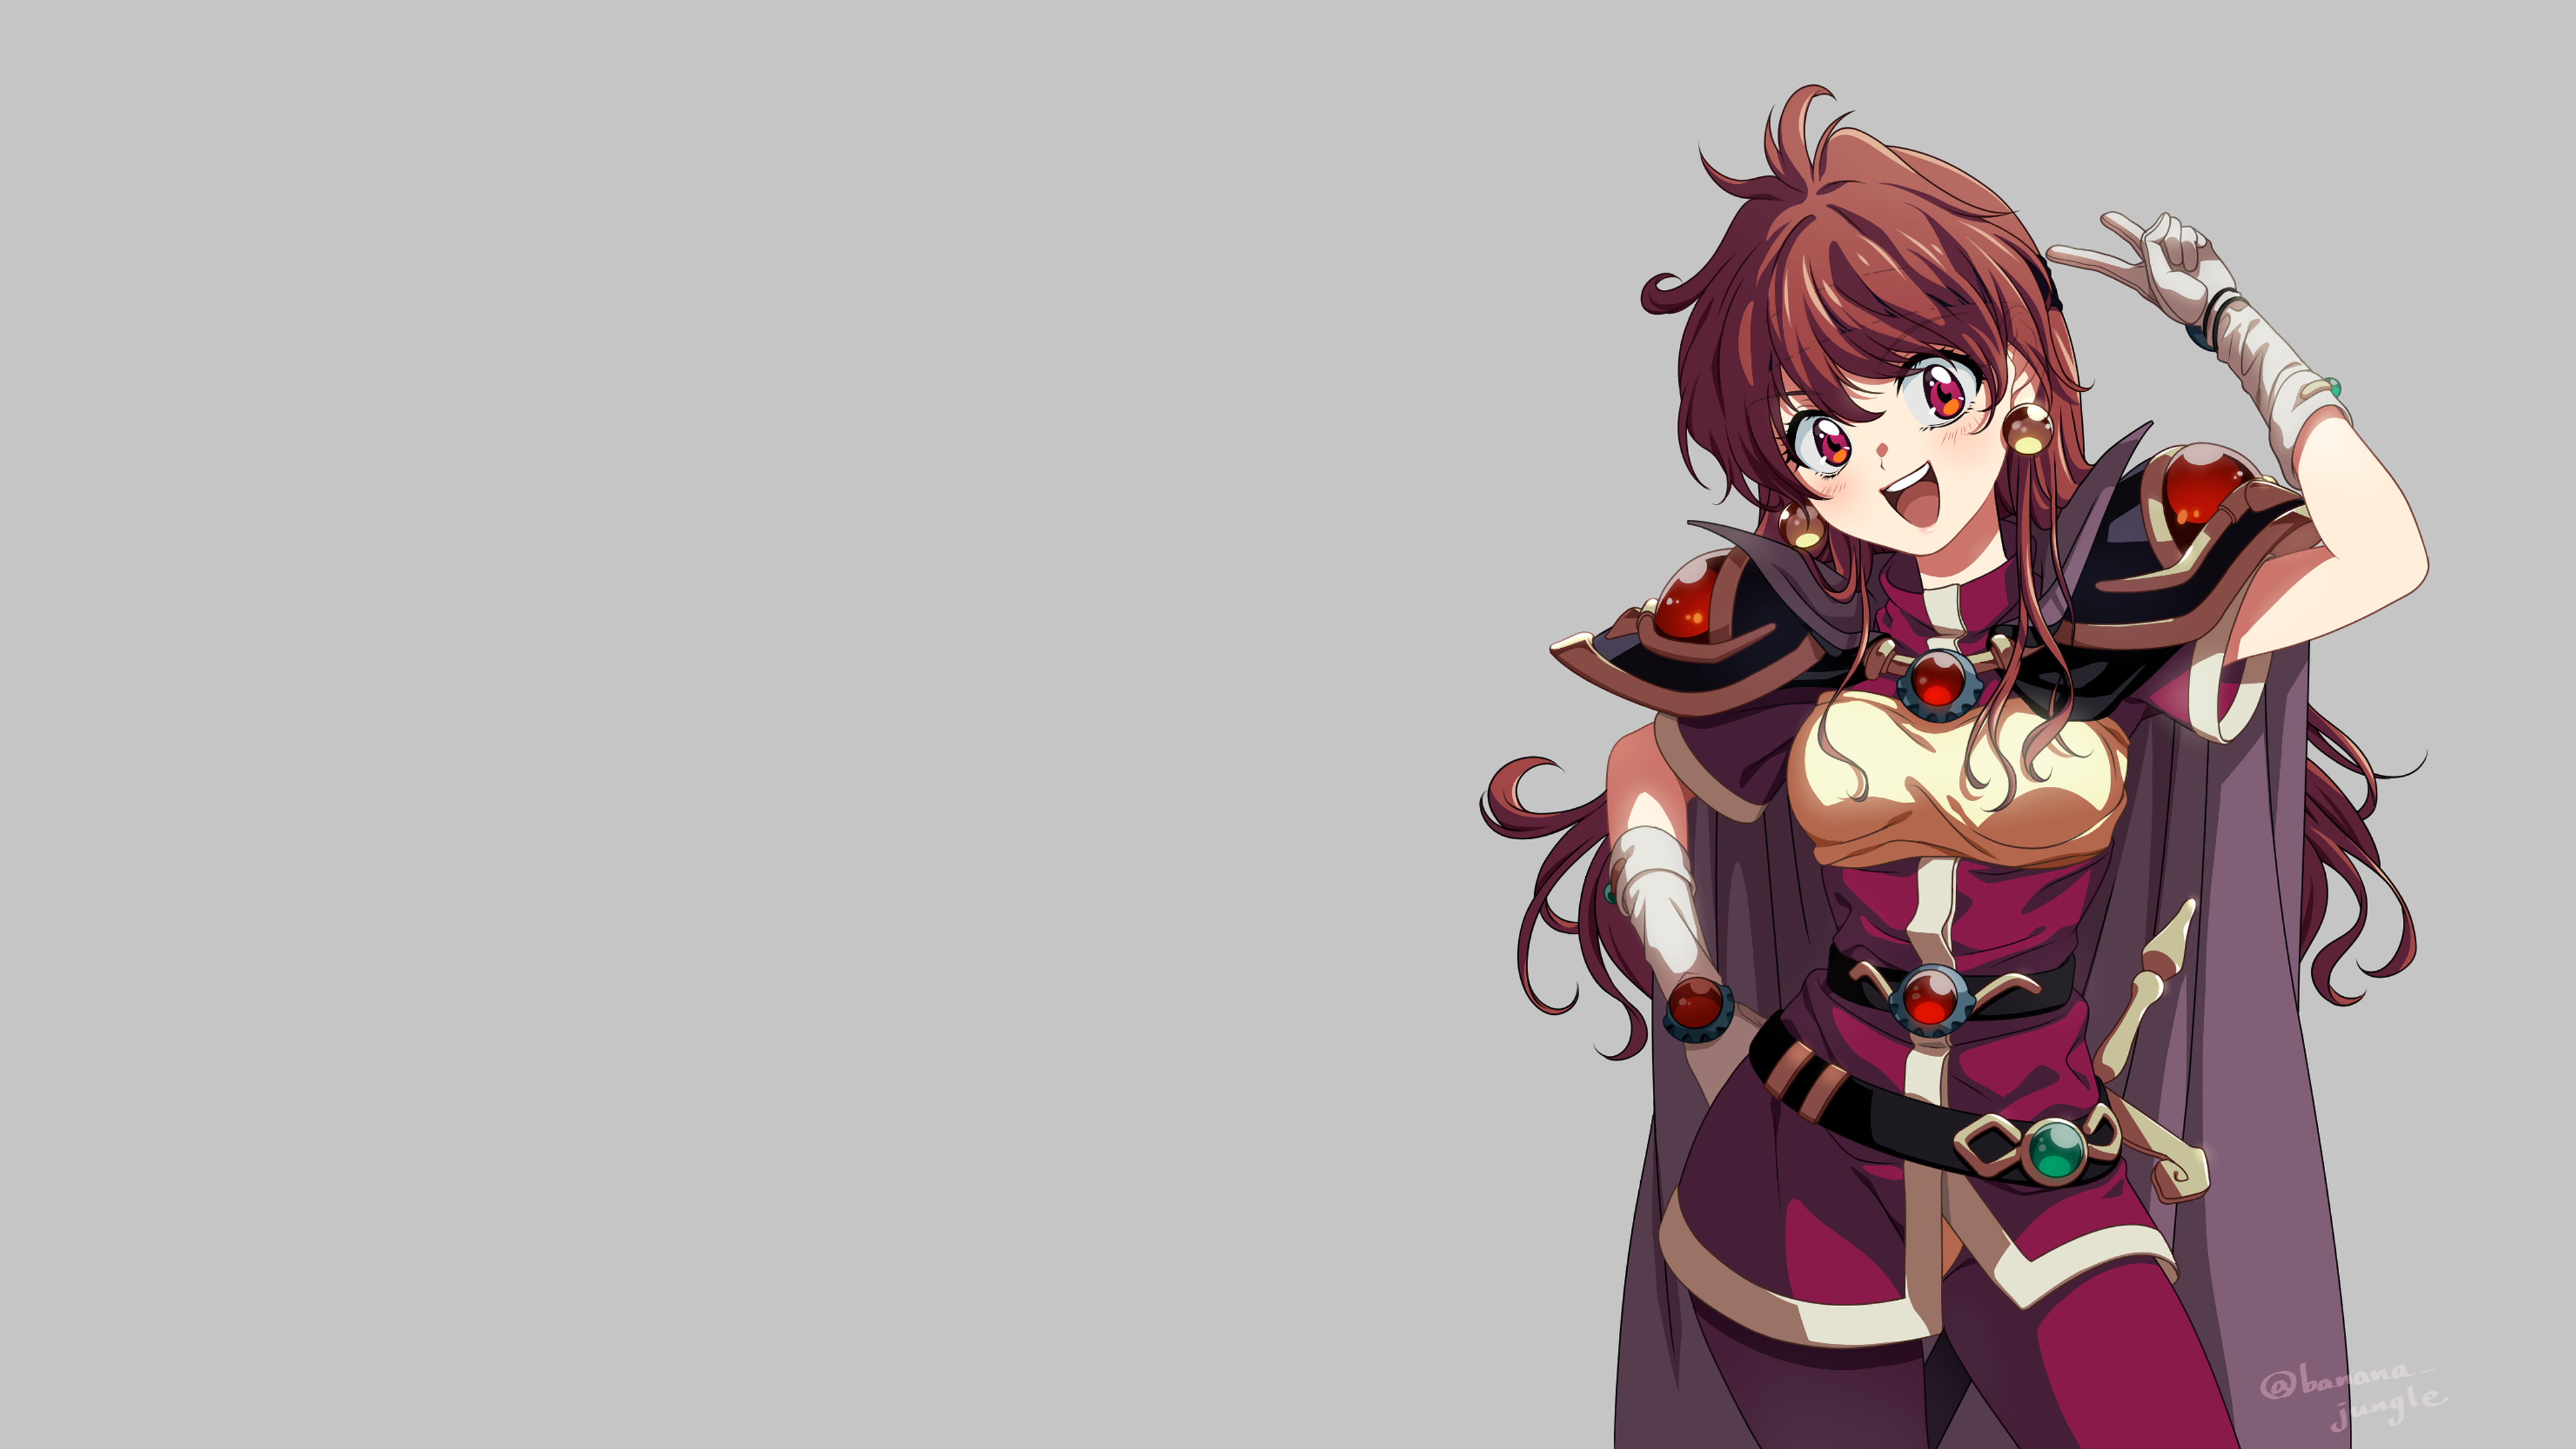 Anime 3840x2160 anime anime girls Slayers bangs blunt bangs long hair shoulder pads Lina Inverse weapon sword jewel jewelry wizard Mages redhead red eyes peace sign gray background simple background